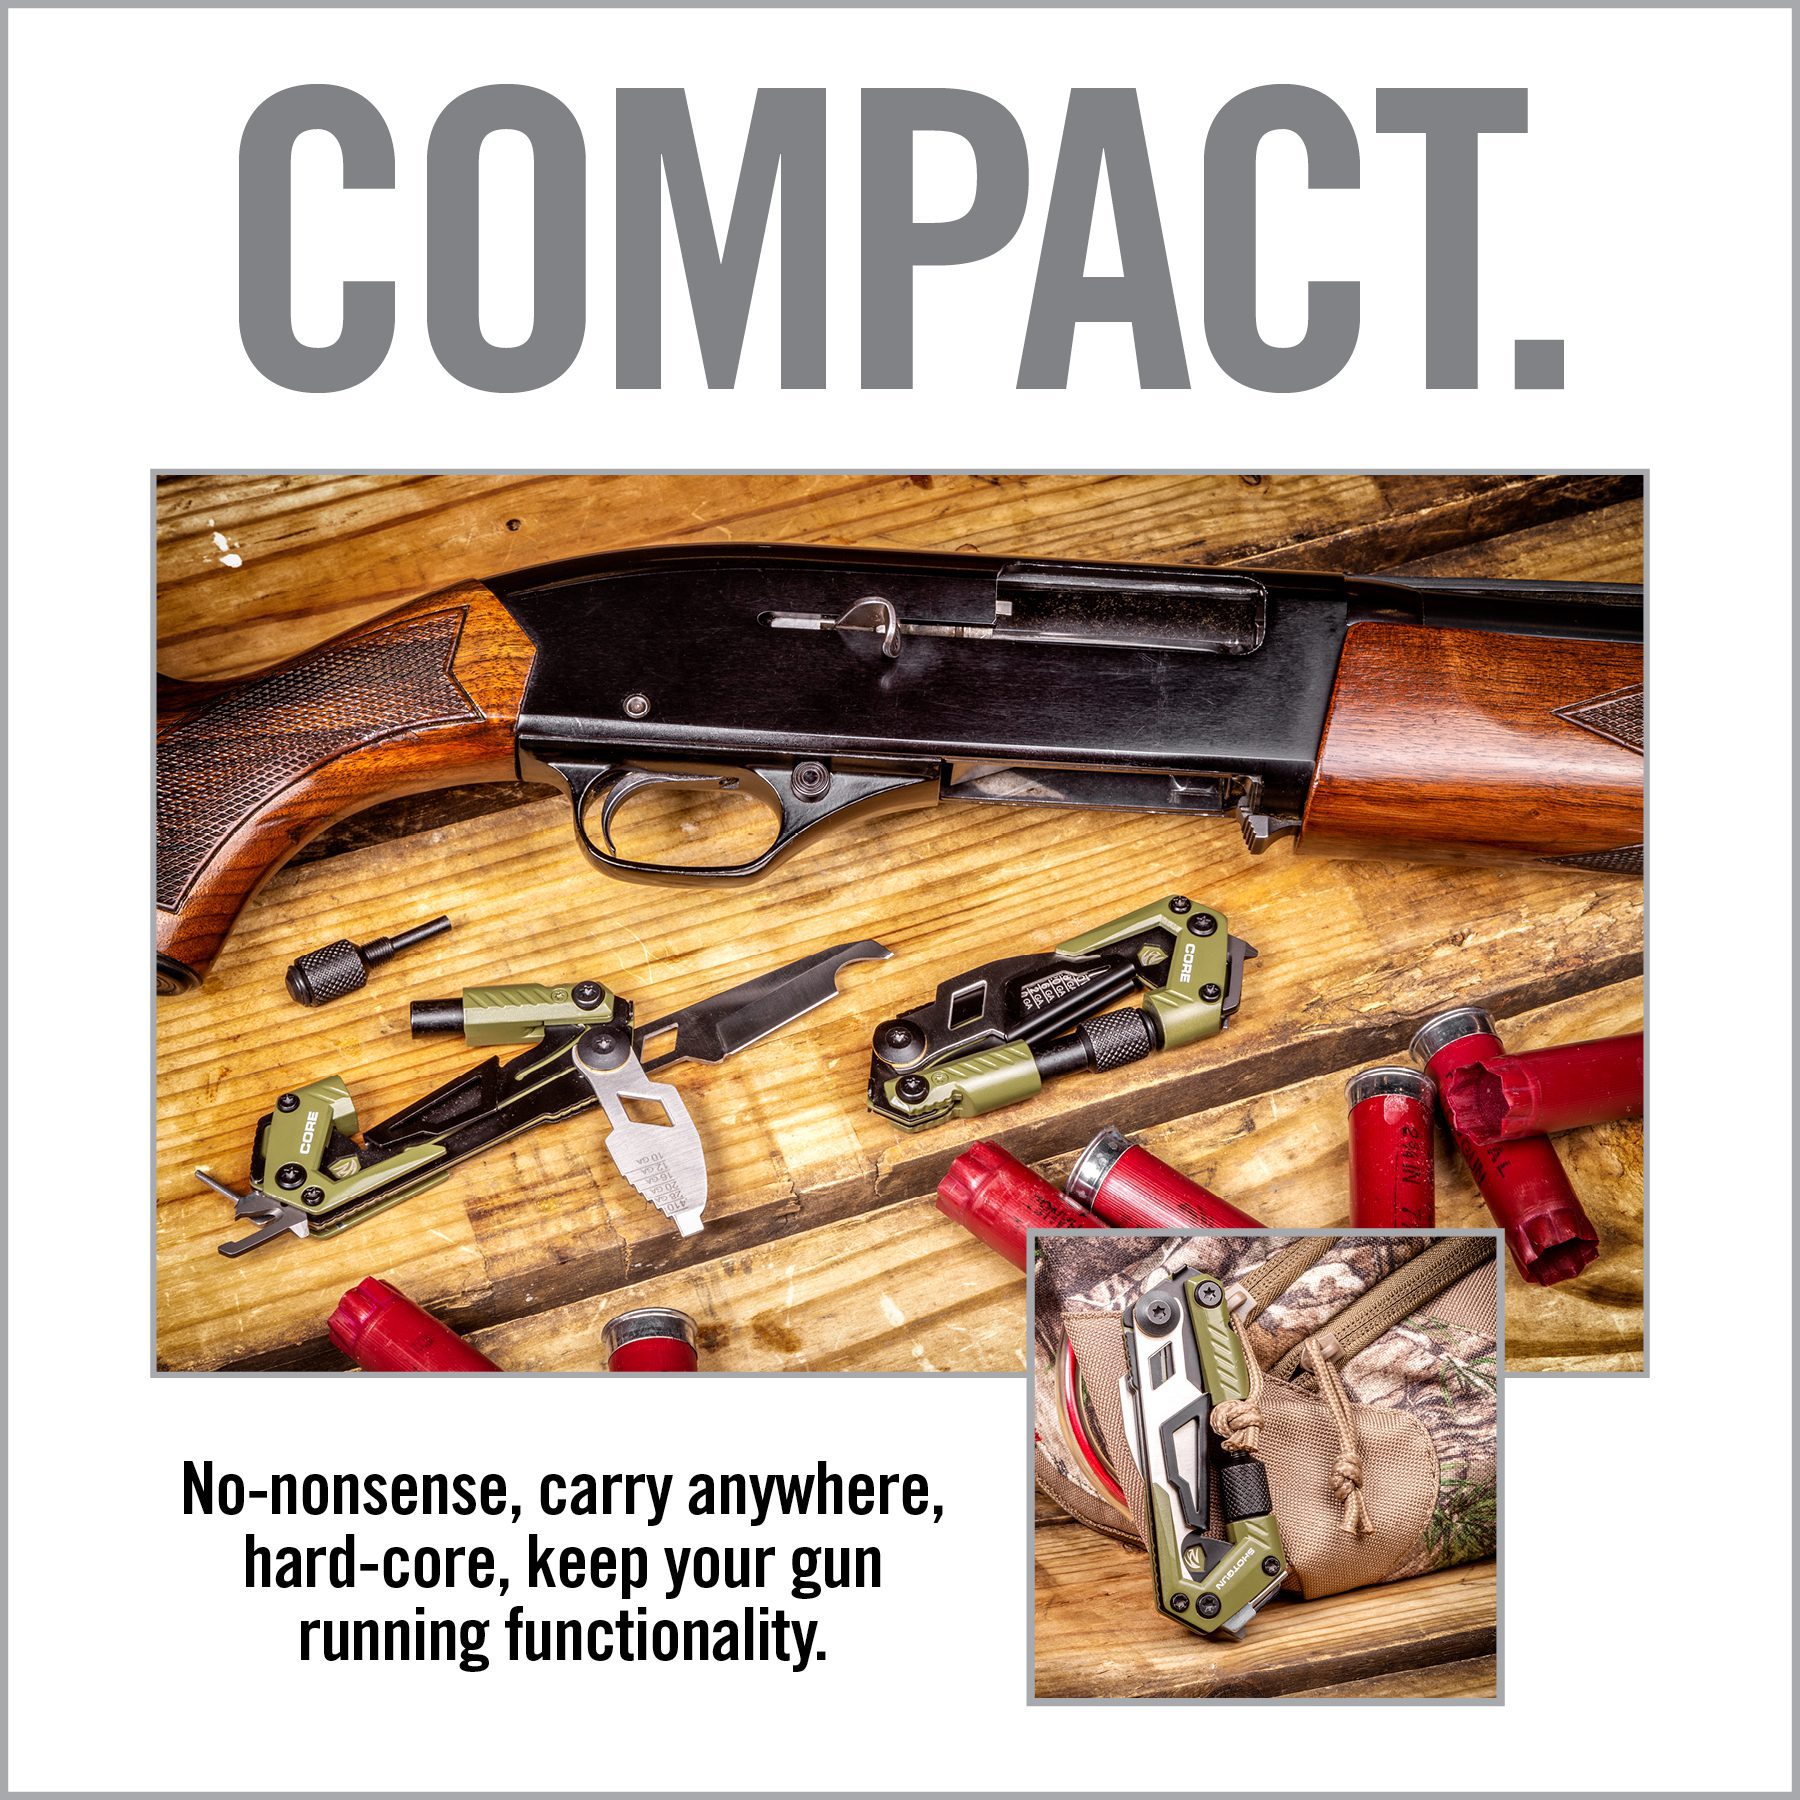 a magazine cover with guns and knives on it